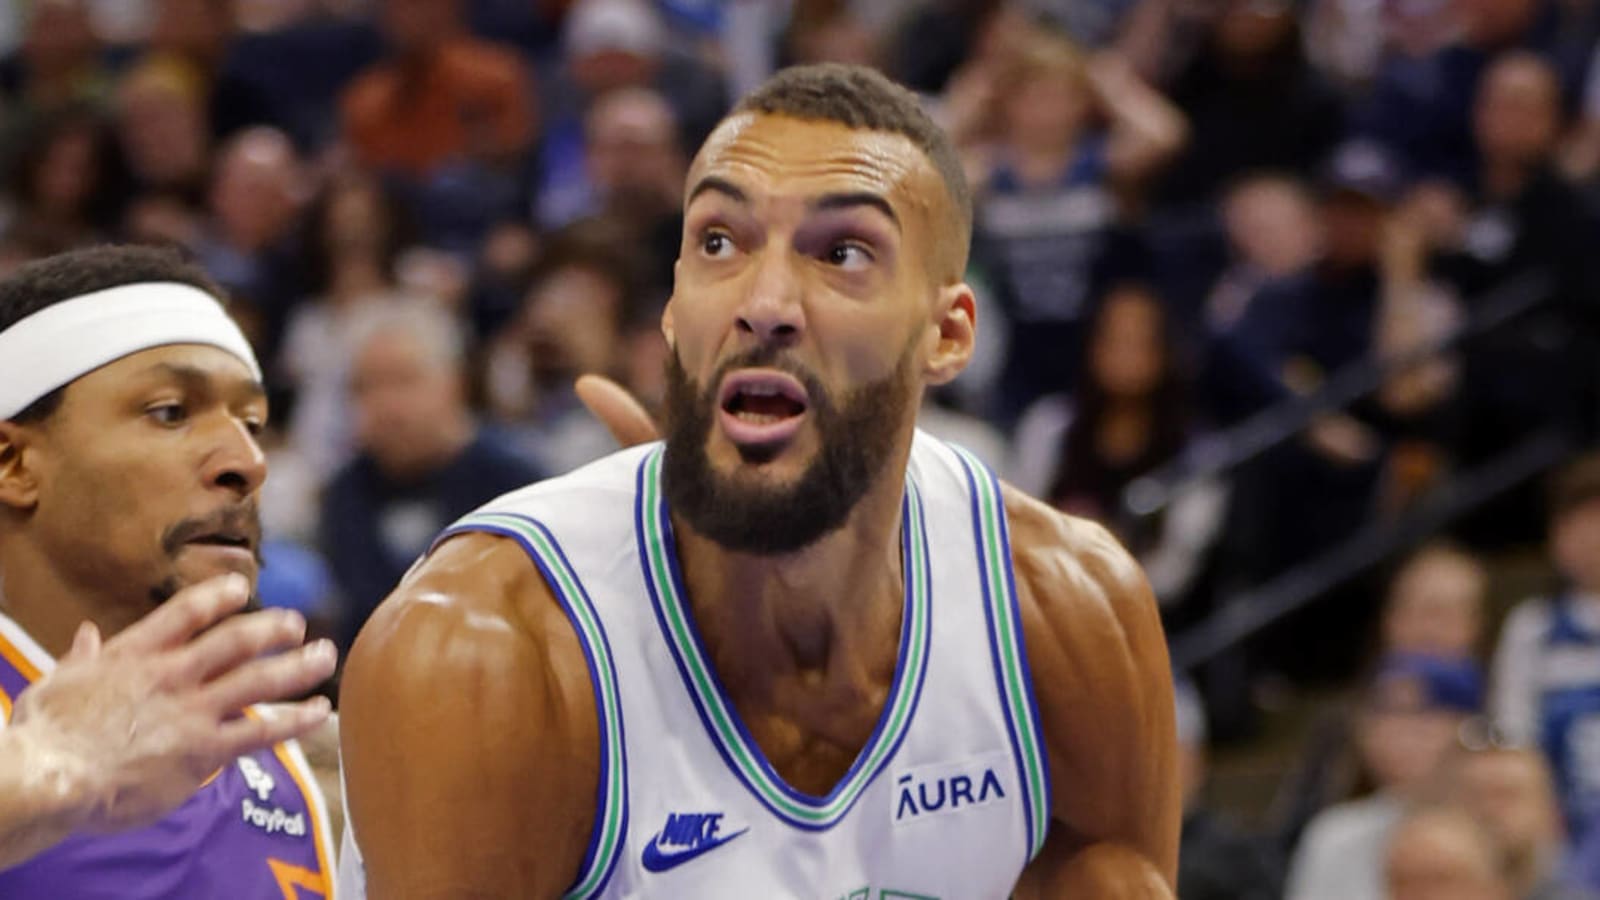 Rudy Gobert fined $75,000 for gesture in Game 4